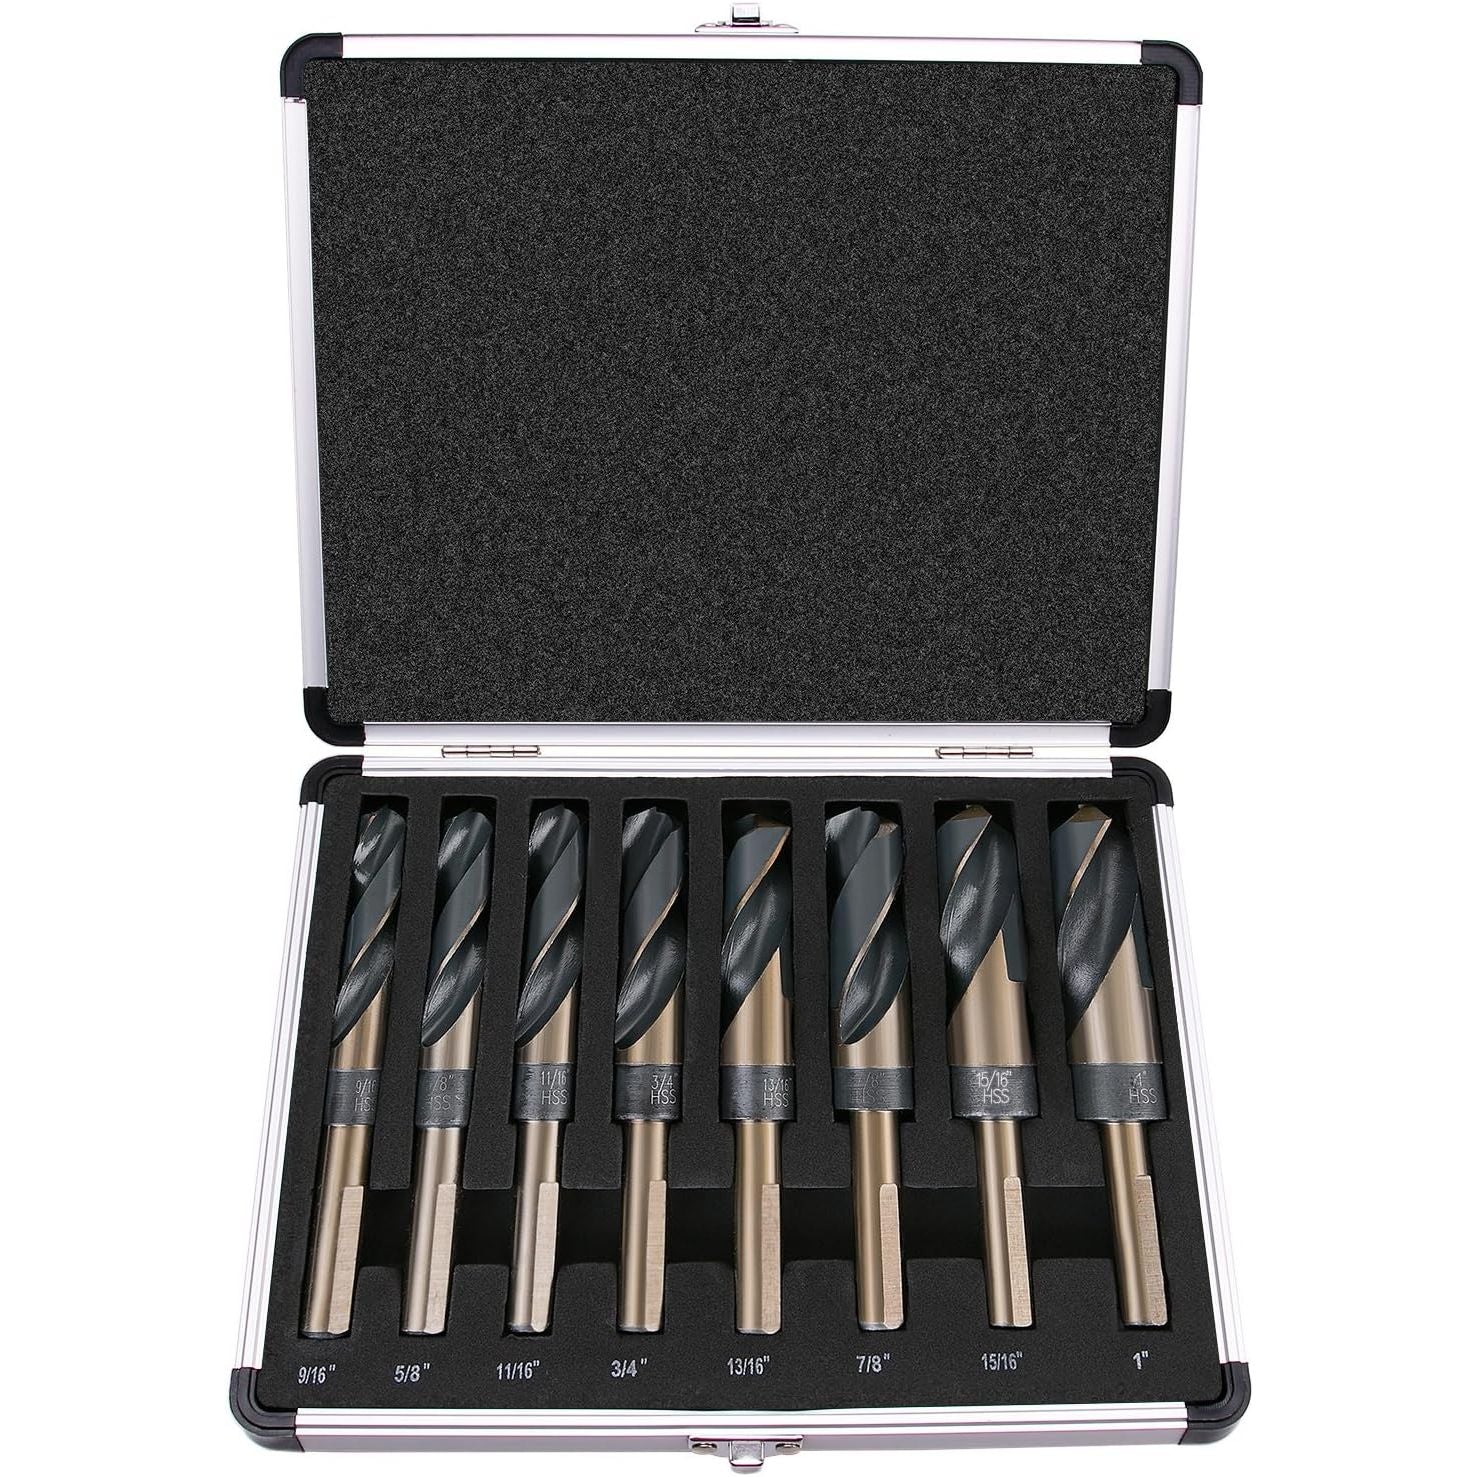 8 Piece Imperial 1/2" Reduced Shank Drill Bit Set with Aluminum Carry Case - South East Clearance Centre